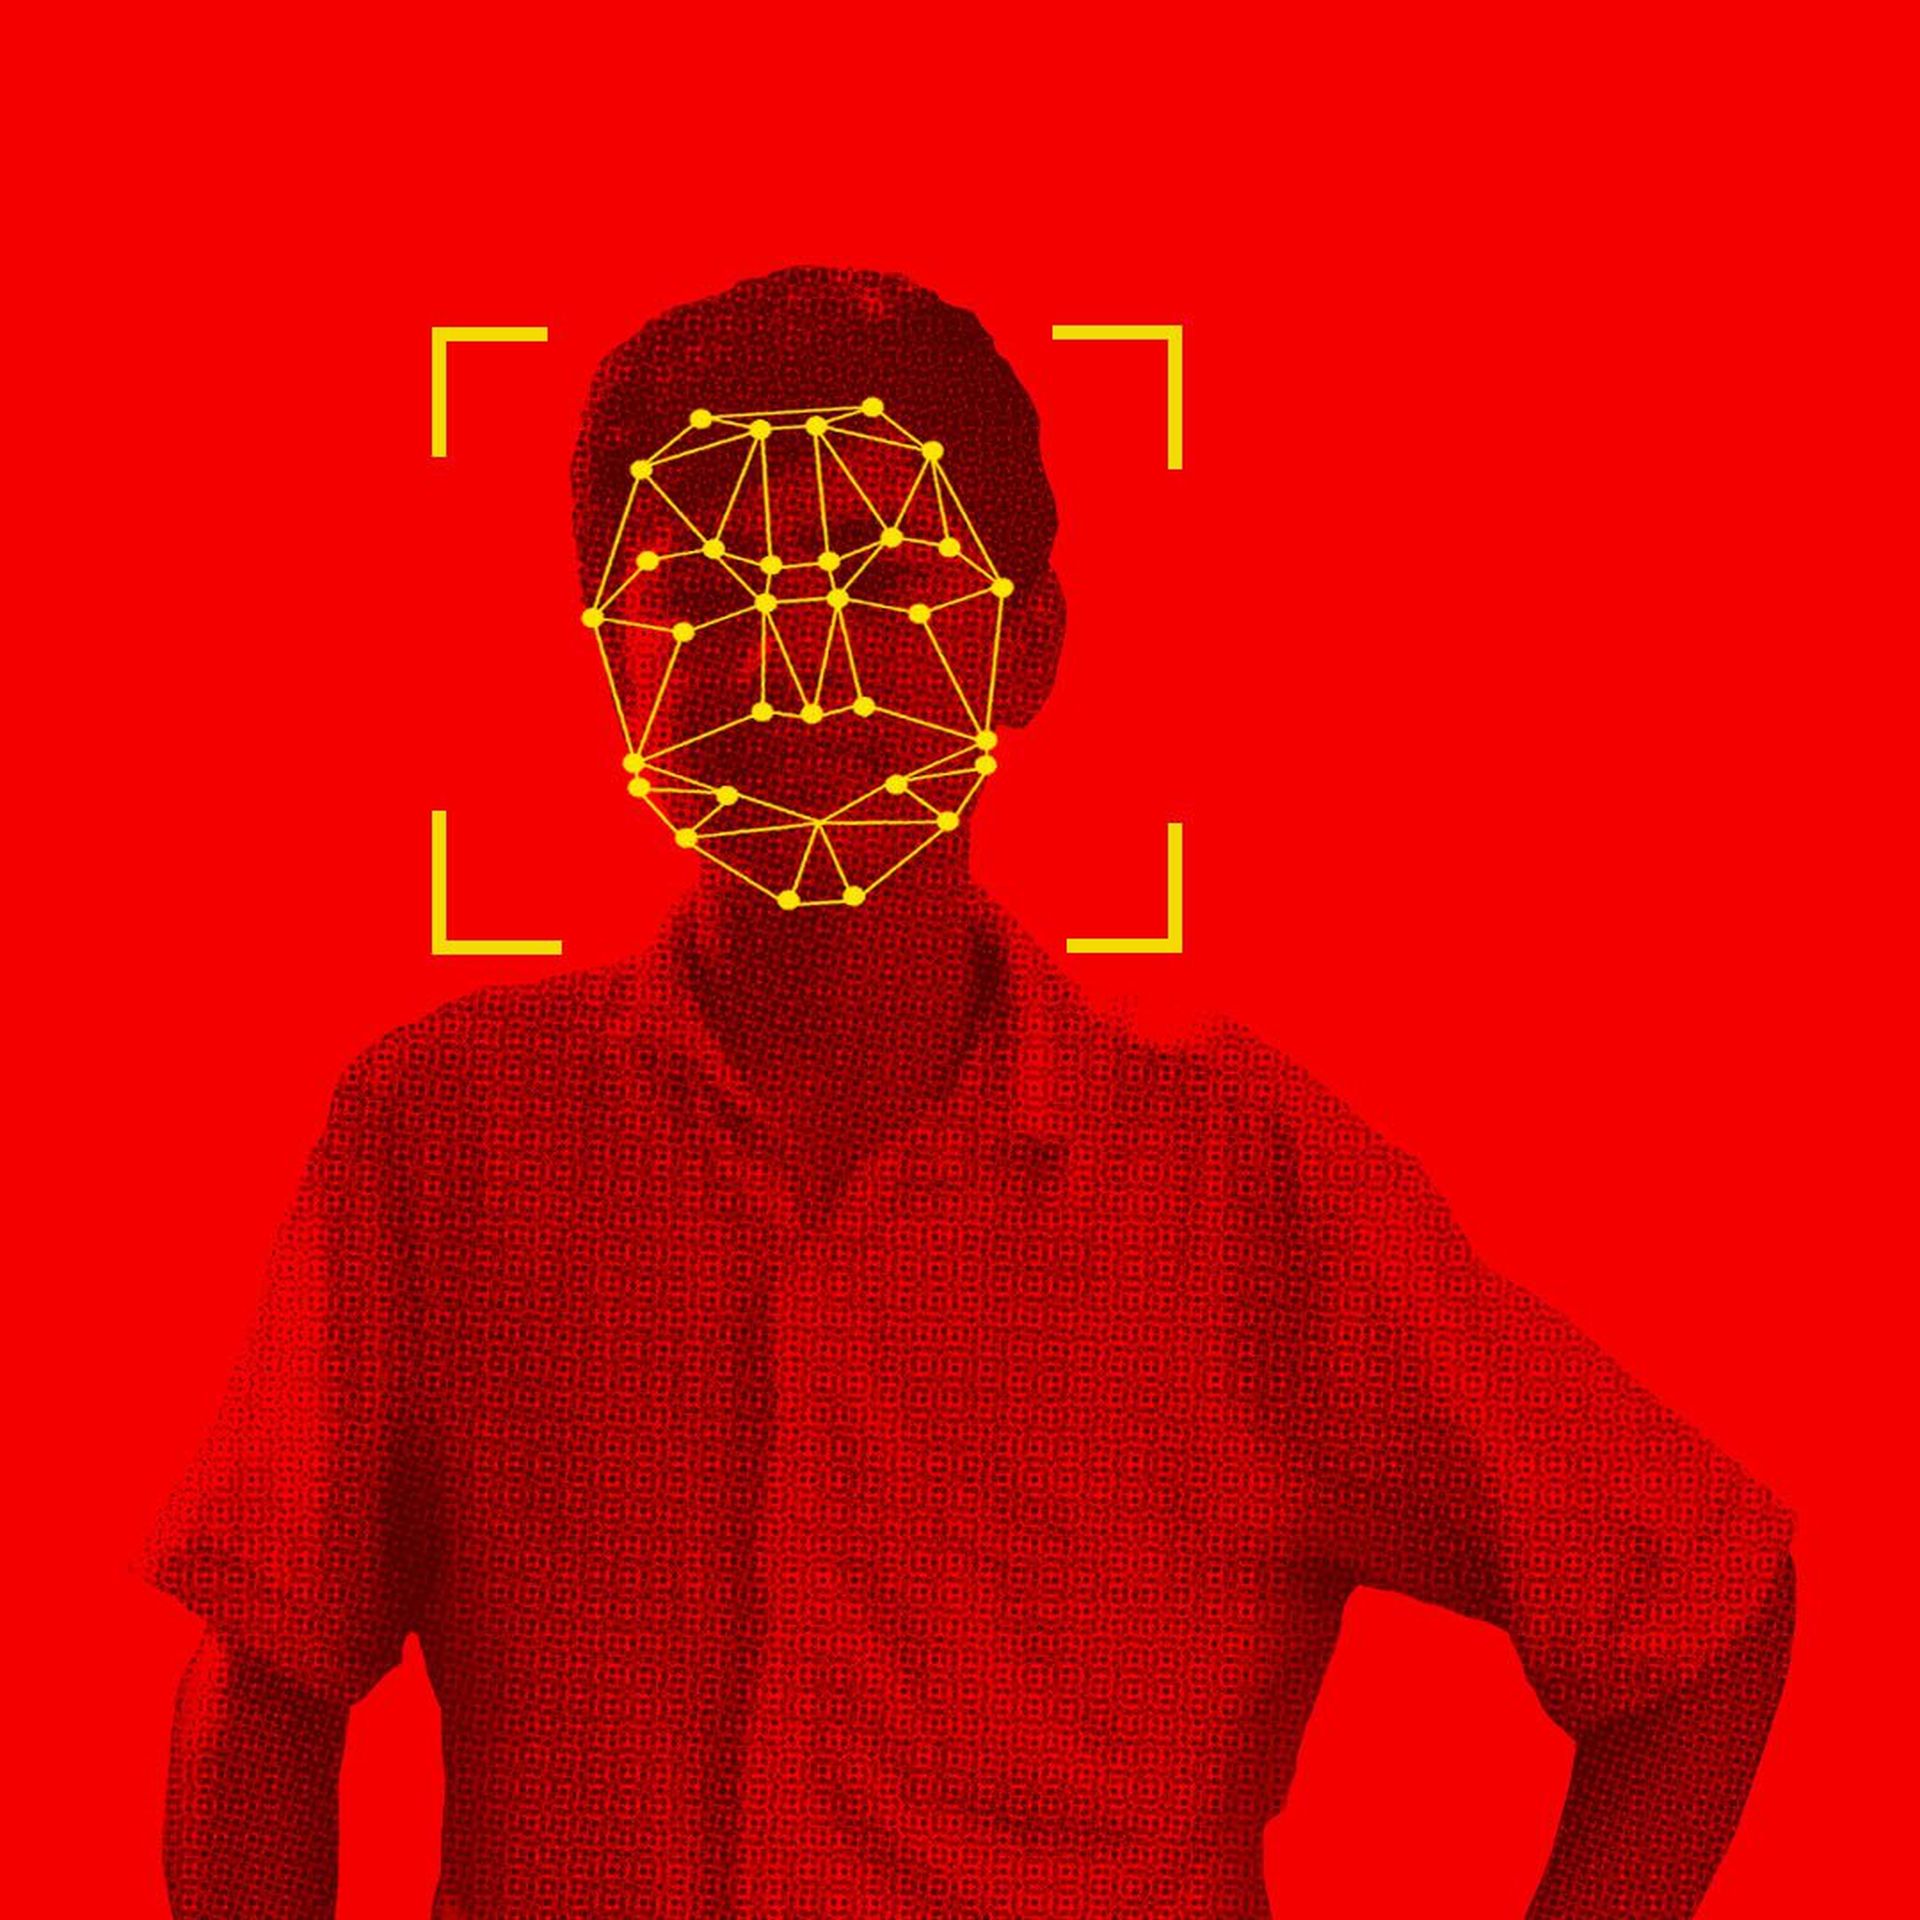 Illustration of a person targeted by face-recognition technology